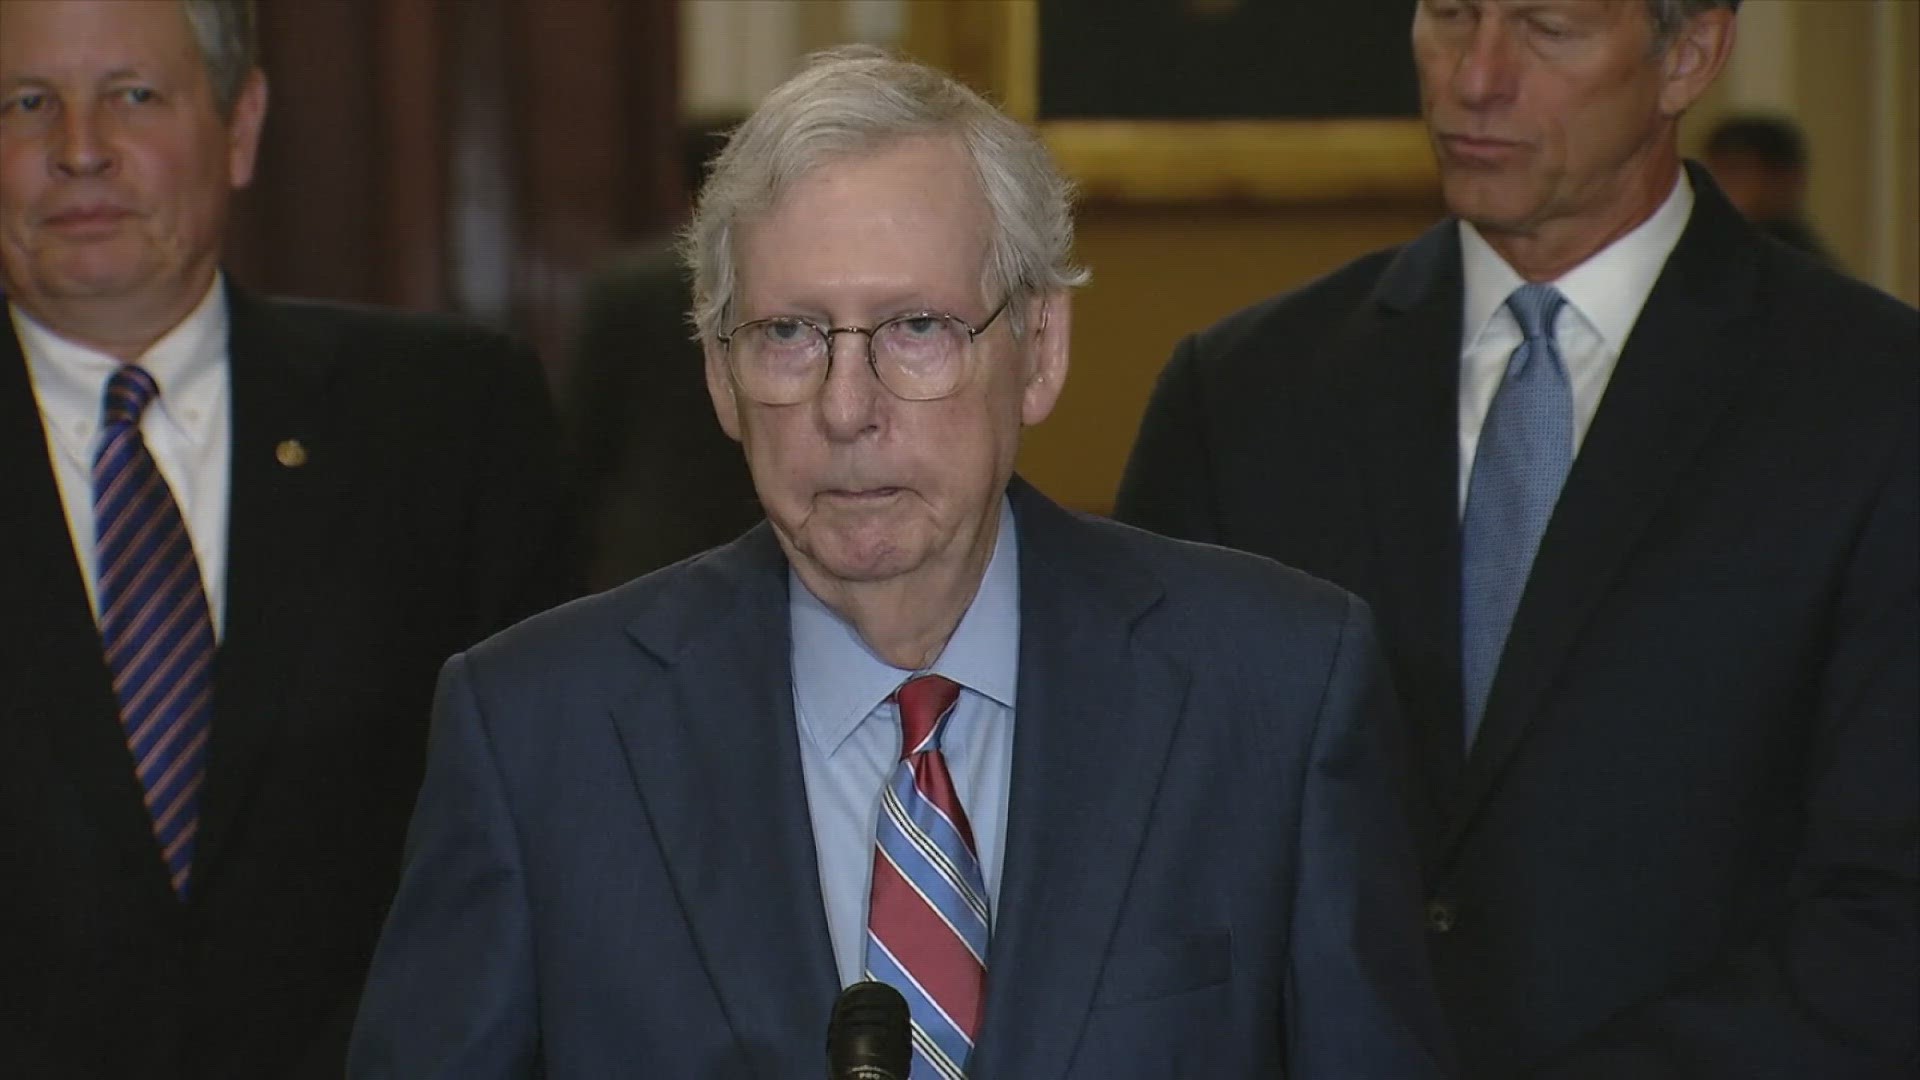 Senator Mitch McConnell has voiced every intention to serve out the remainder of his term, concluding in 2027. But what would happen if he did step down?